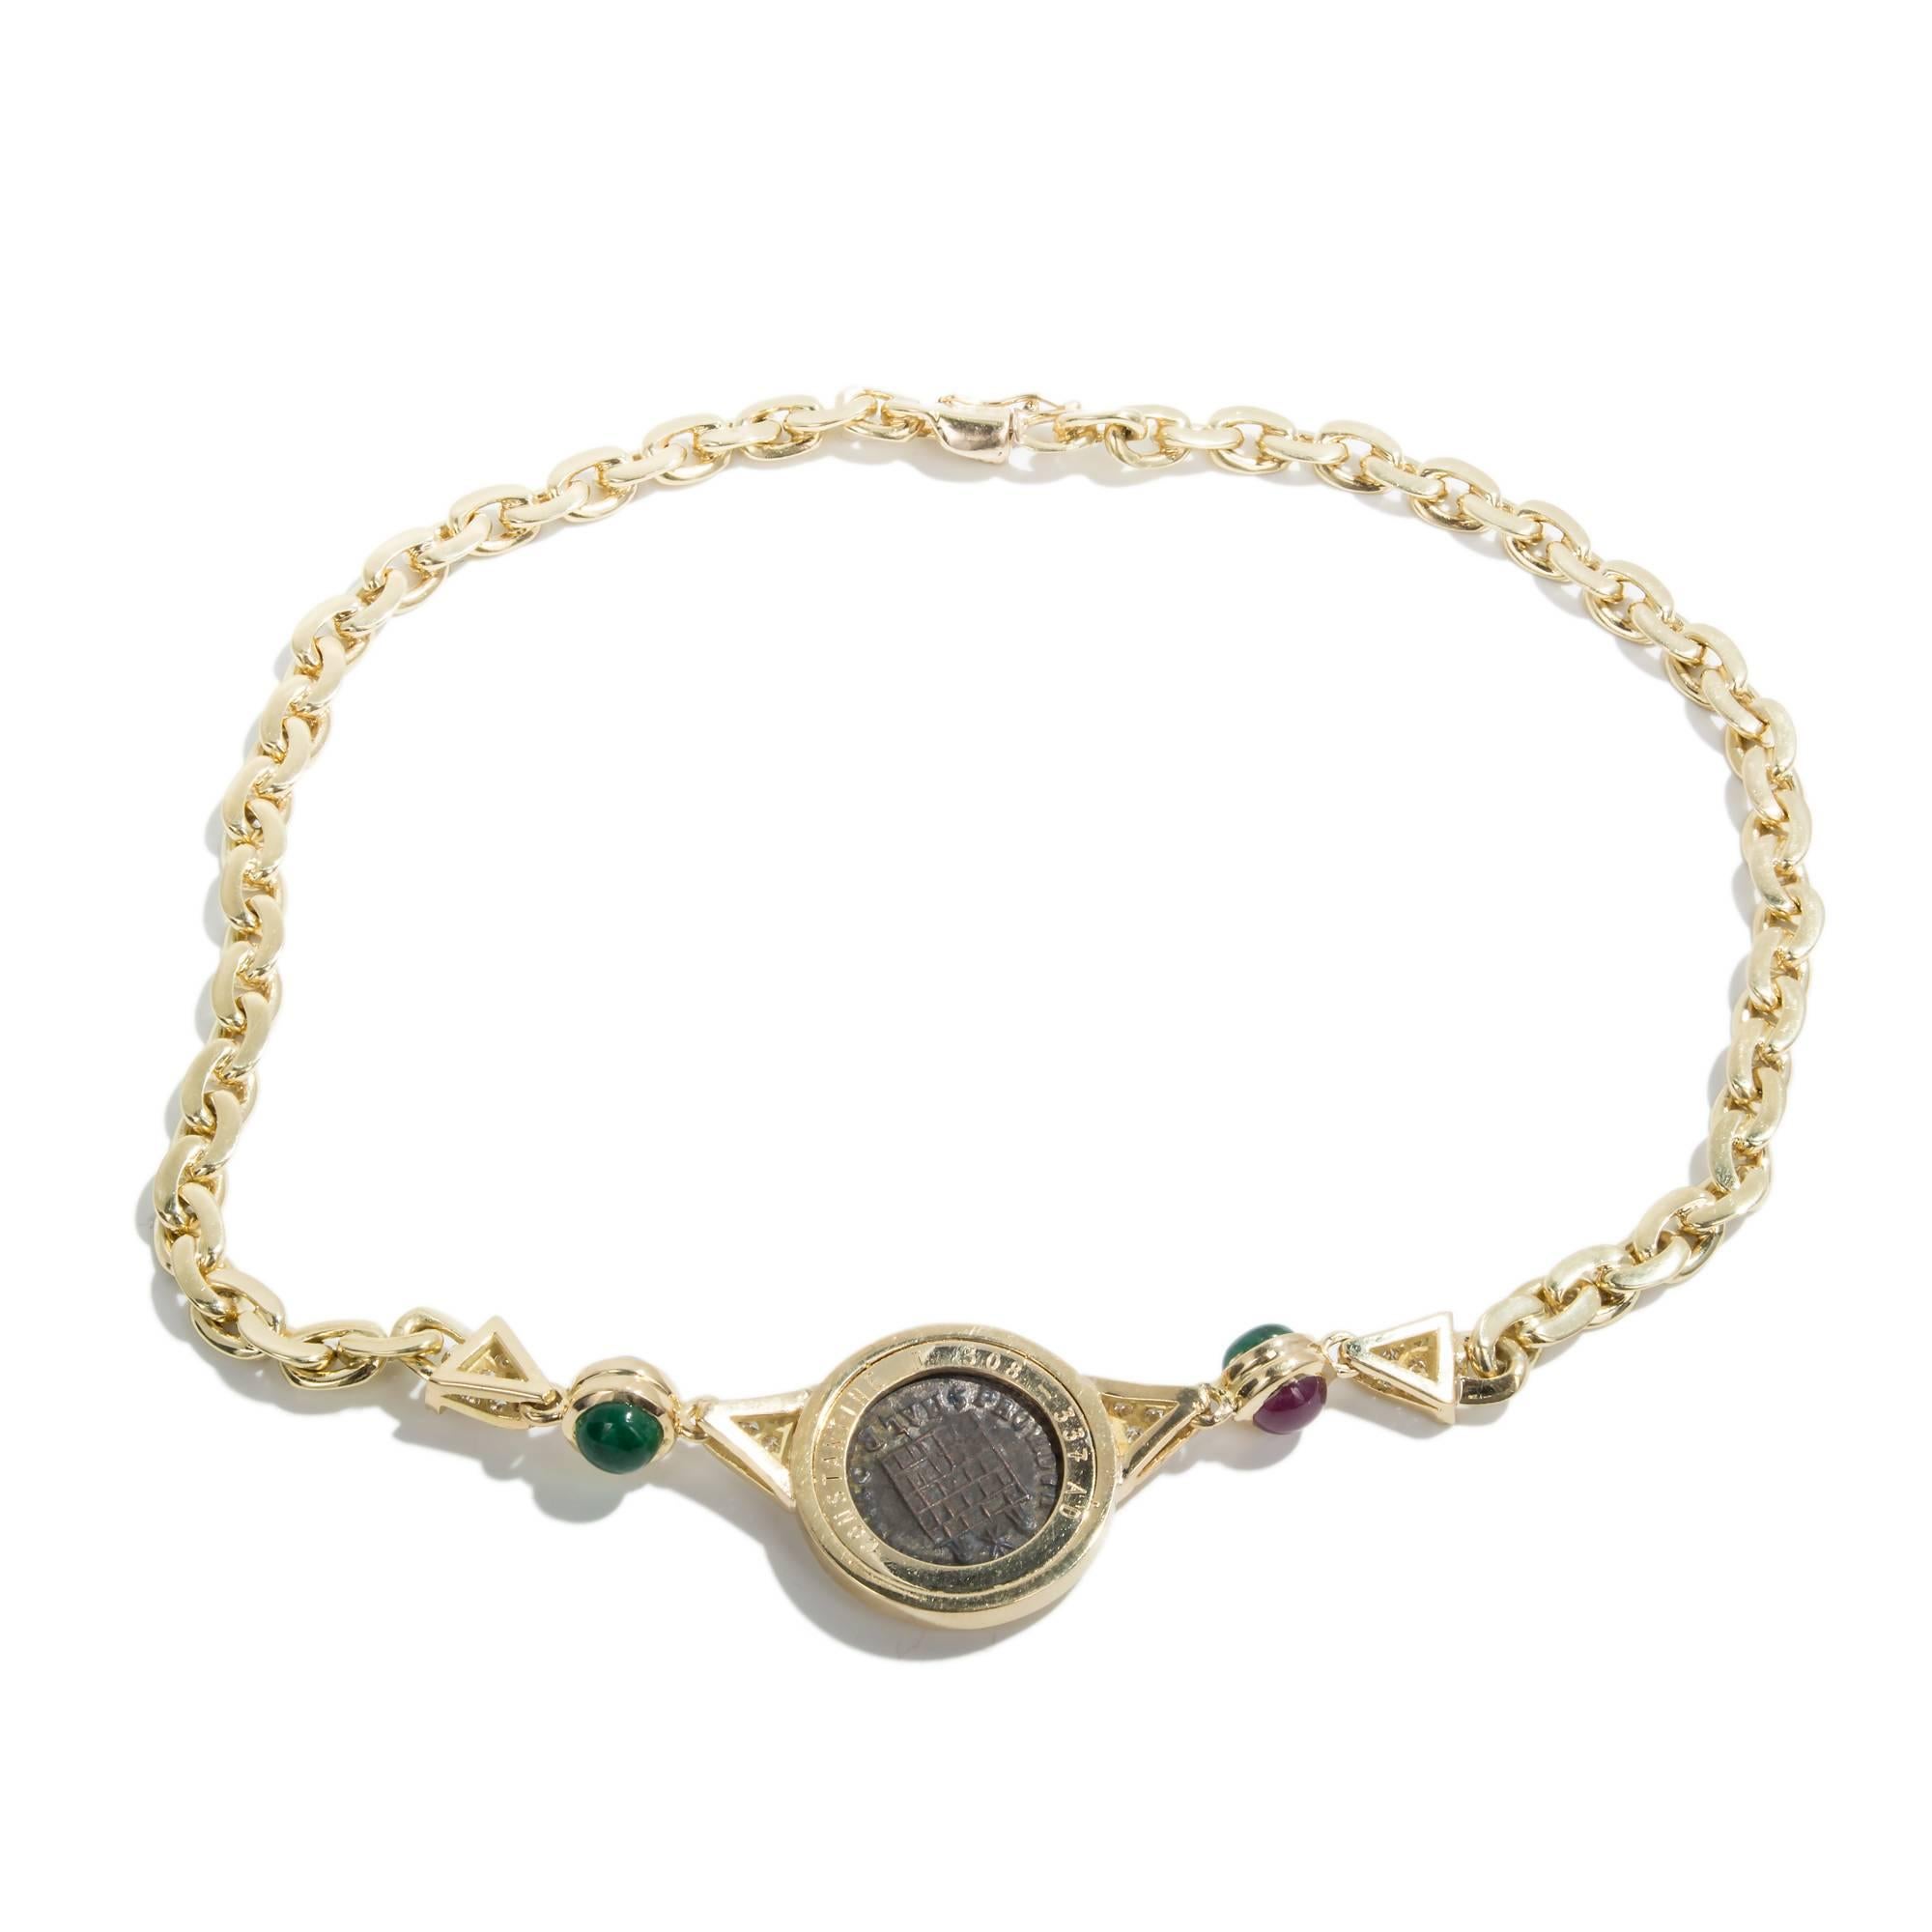 Ancient Roman Coin Necklace in 18k Yellow Gold with genuine cabochon emerald and ruby accents as well as diamond pave. 

24 round G VS diamonds .48cts approx. total weight: .48cts
1 Roman Coin
2 round cabochon rubies 6.5mm approx. total weight: